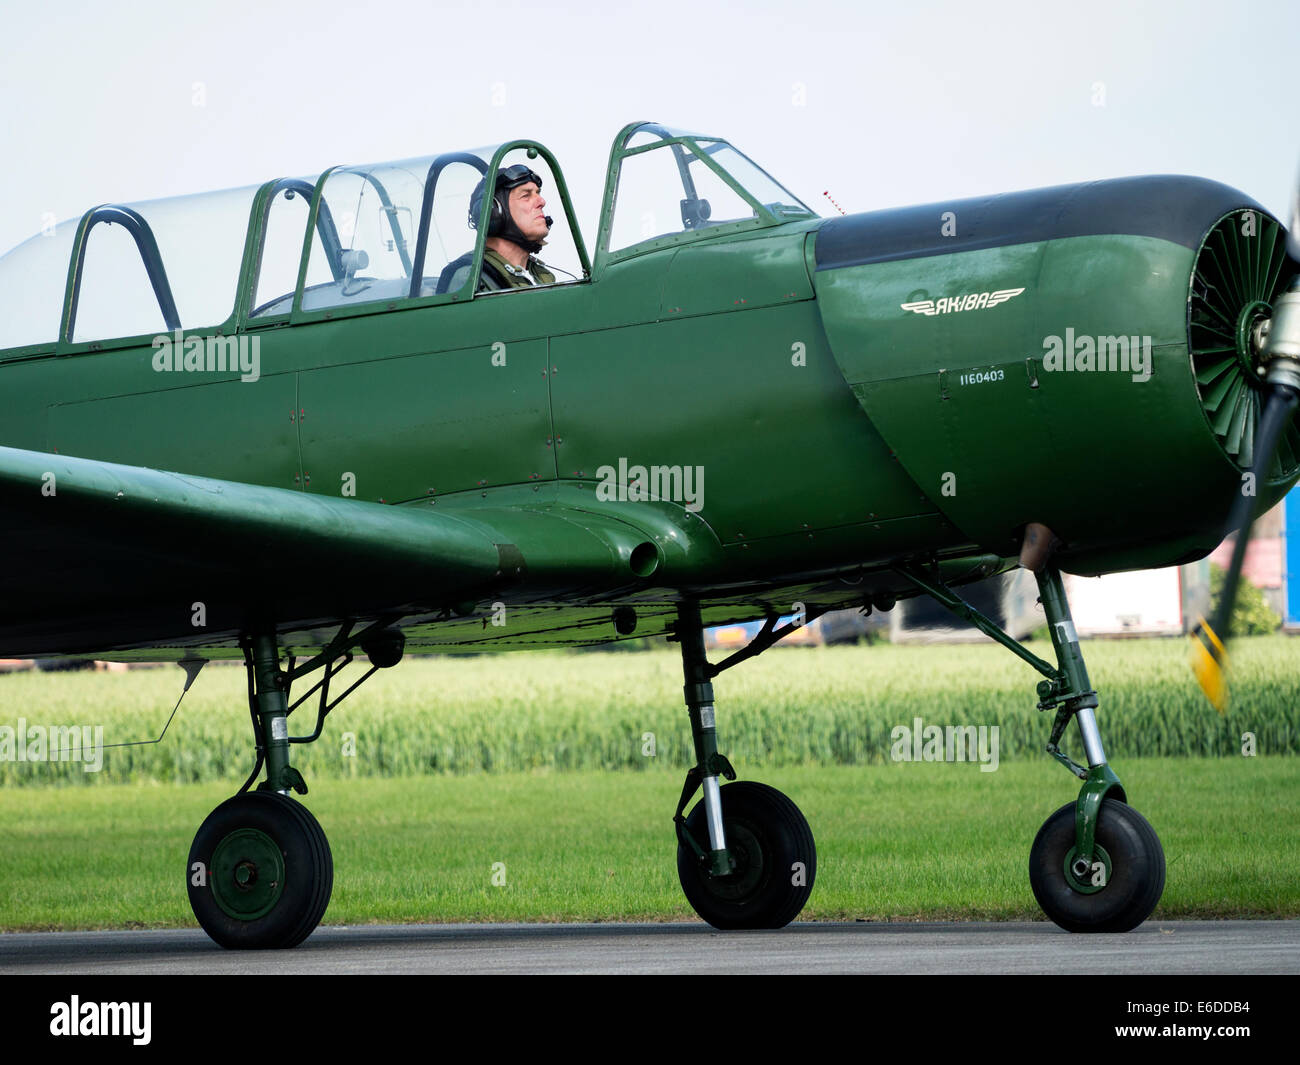 1950s vintage Russian built Yak training aircraft at Breighton airfield,yorkshire,uk Stock Photo